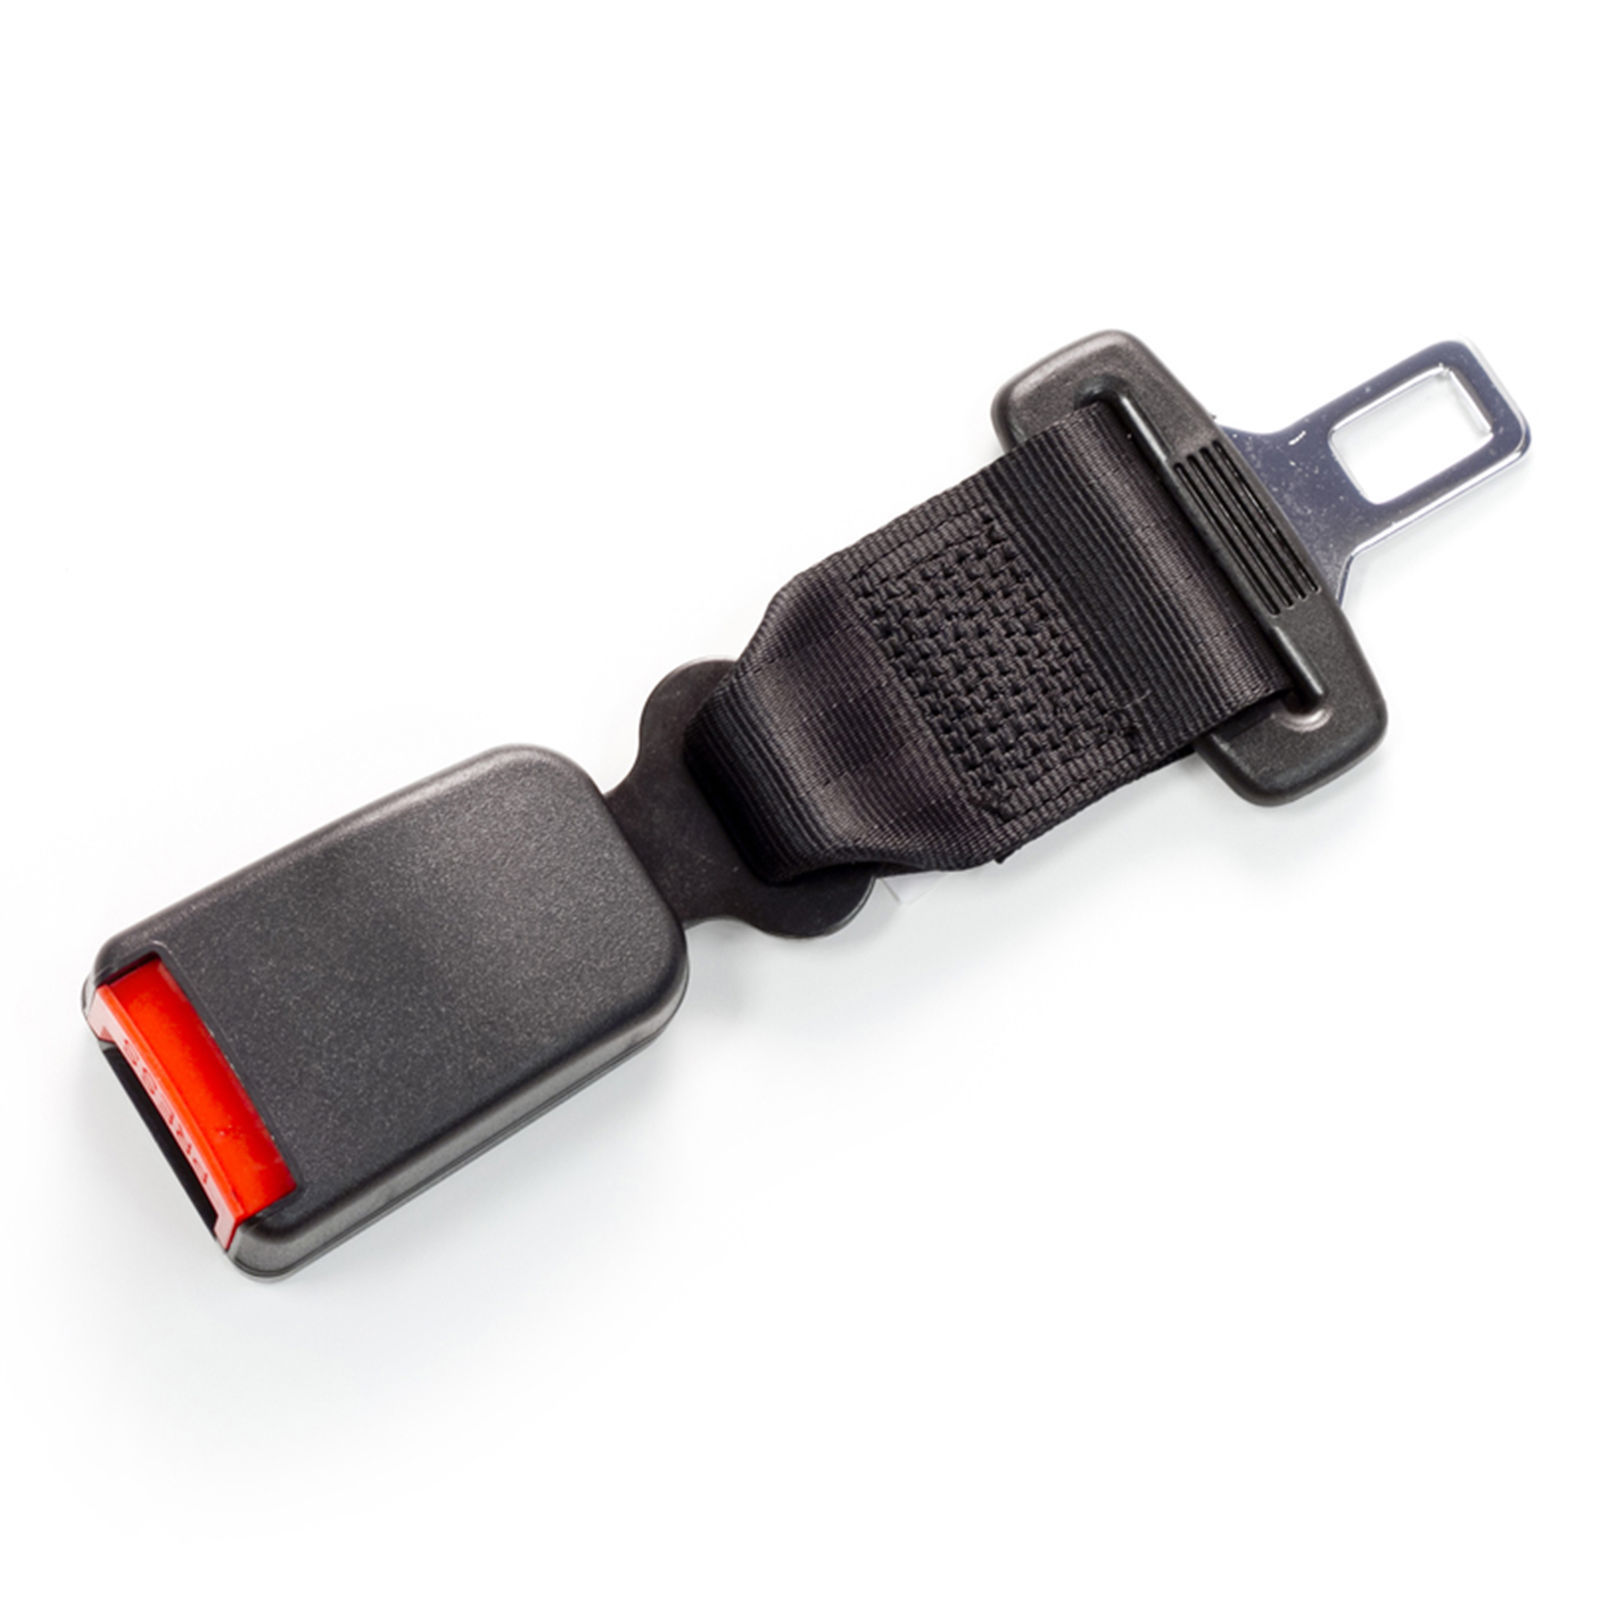 Seat Belt Extension for 2010 Chrysler Town & Country Front Seats - E4 Safety Cer - $29.99